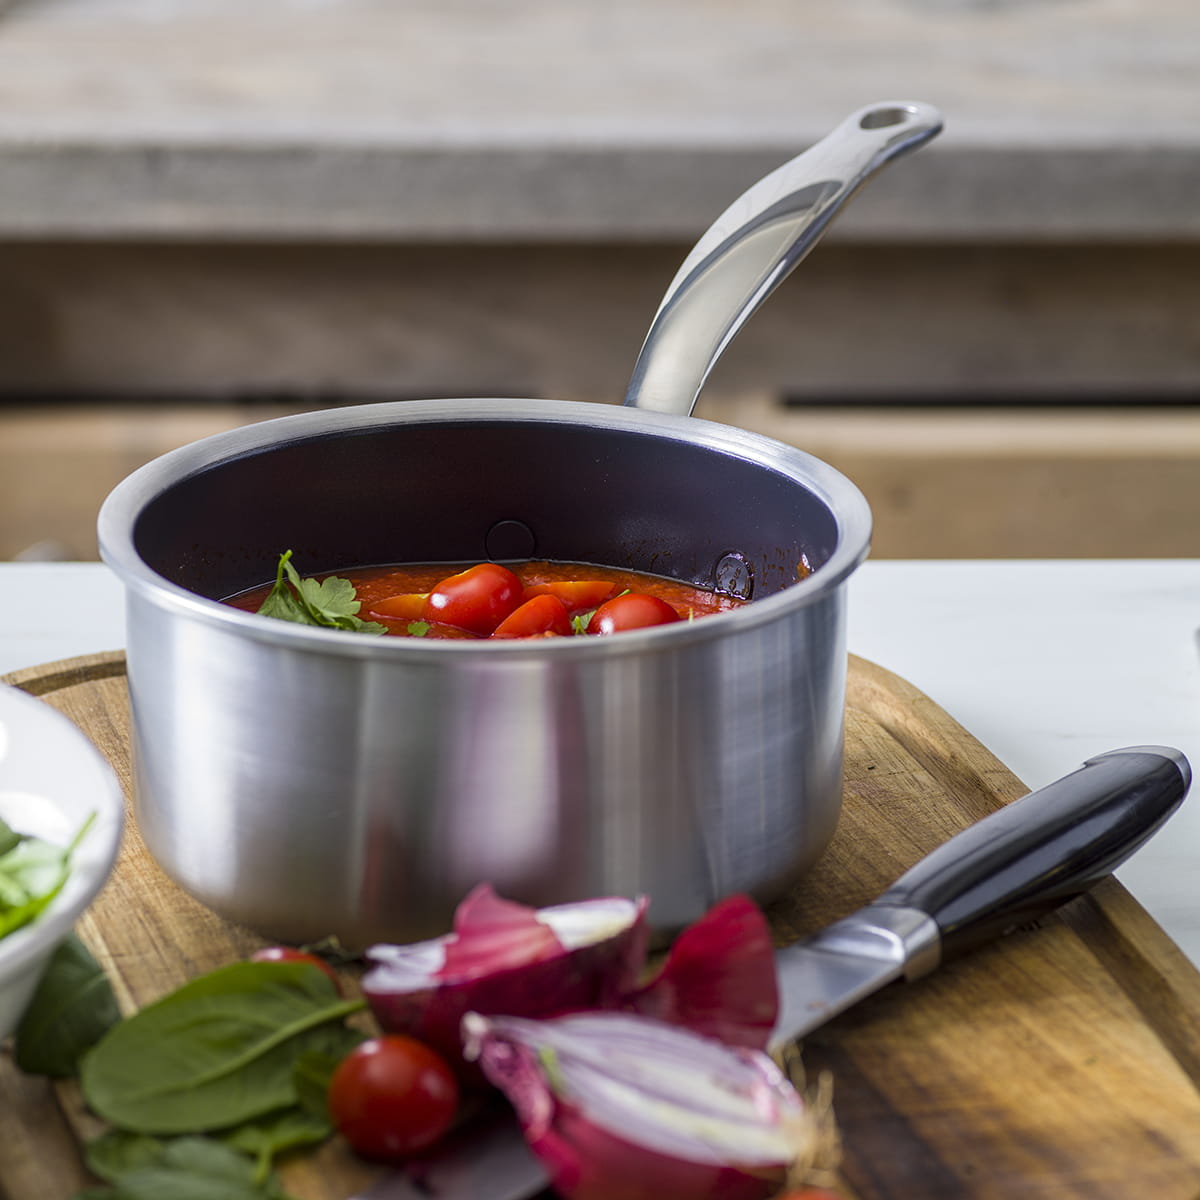 CC004405-001 - Premiere  Saucepan, Stainless Steel - 16cm - Product Image 6